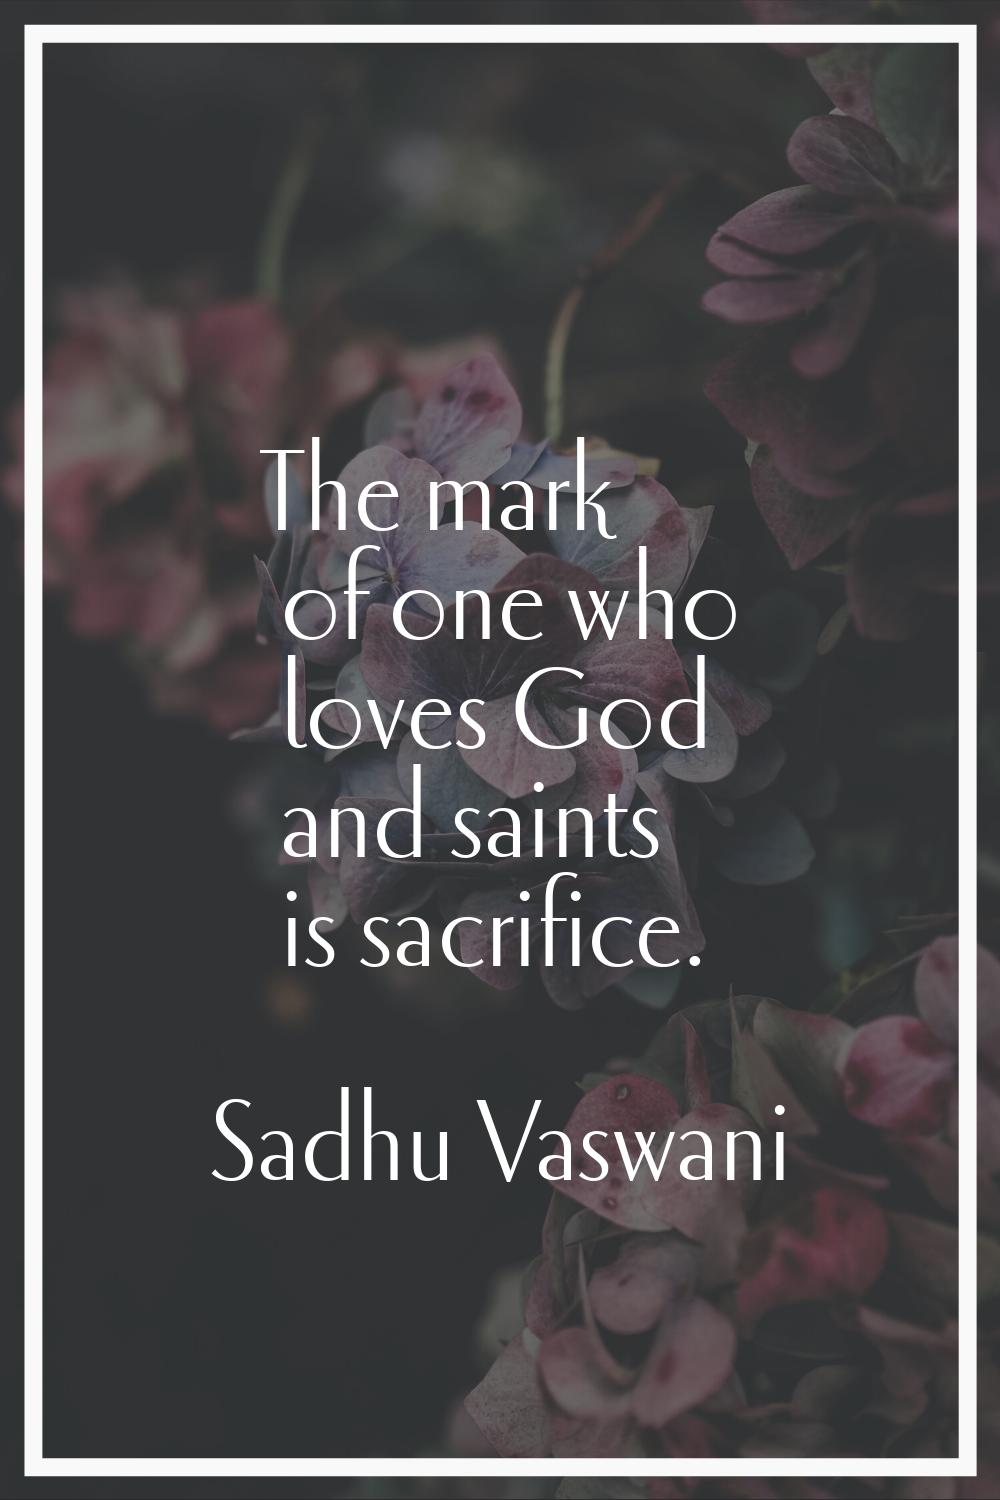 The mark of one who loves God and saints is sacrifice.